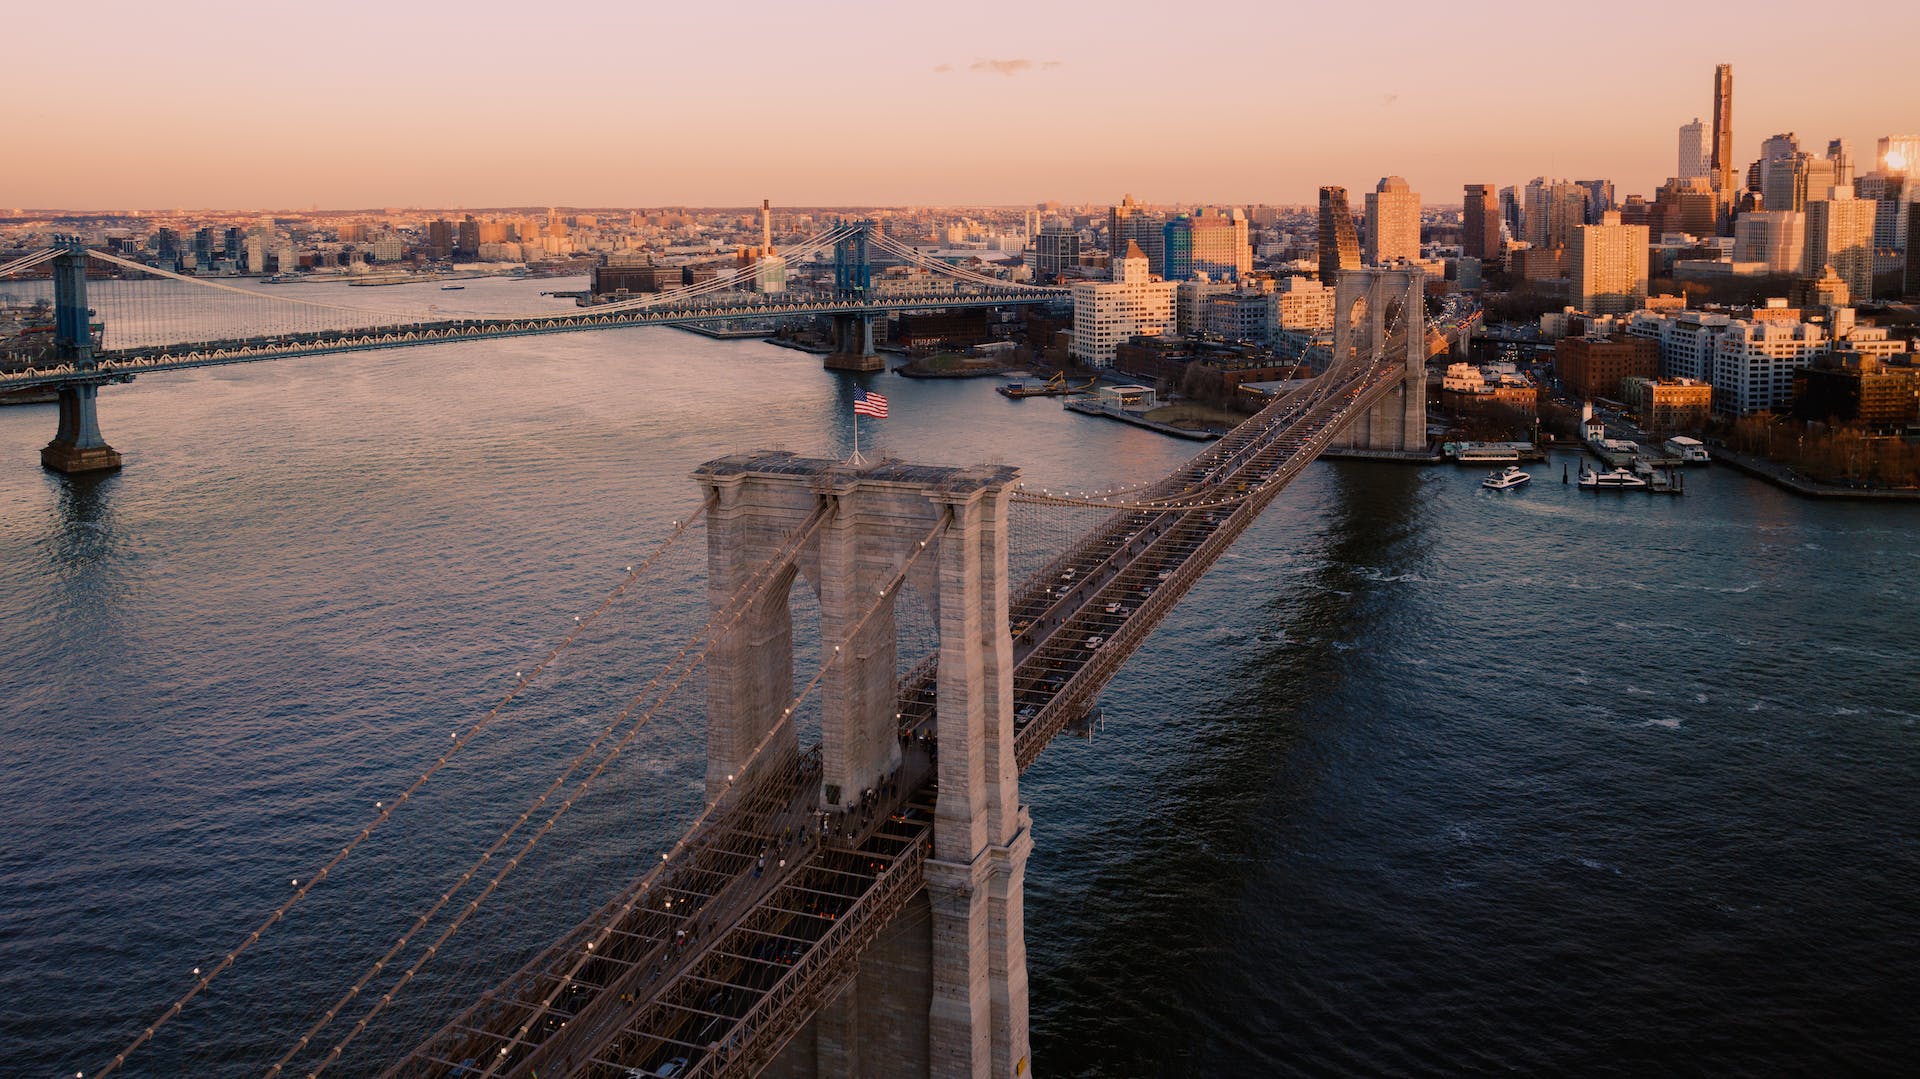 <p>The Brooklyn Bridge is a hybrid cable-stayed suspension bridge in New York City. It spans across the East River between Manhattan and Brooklyn, and supports 6 lanes of vehicles and a pedestrian/bike path.</p><p>It is known as the <strong>world’s first suspension bridge</strong>, and it was the longest when it opened in 1883.</p><p>Visitors report walking across the Brookyn Bridge at night to be a “magical experience”. The city skyline from the bridge is a view like no other.</p><p><strong>Features:</strong> Walking path</p><p>Lerone Pieters, Pexels</p>